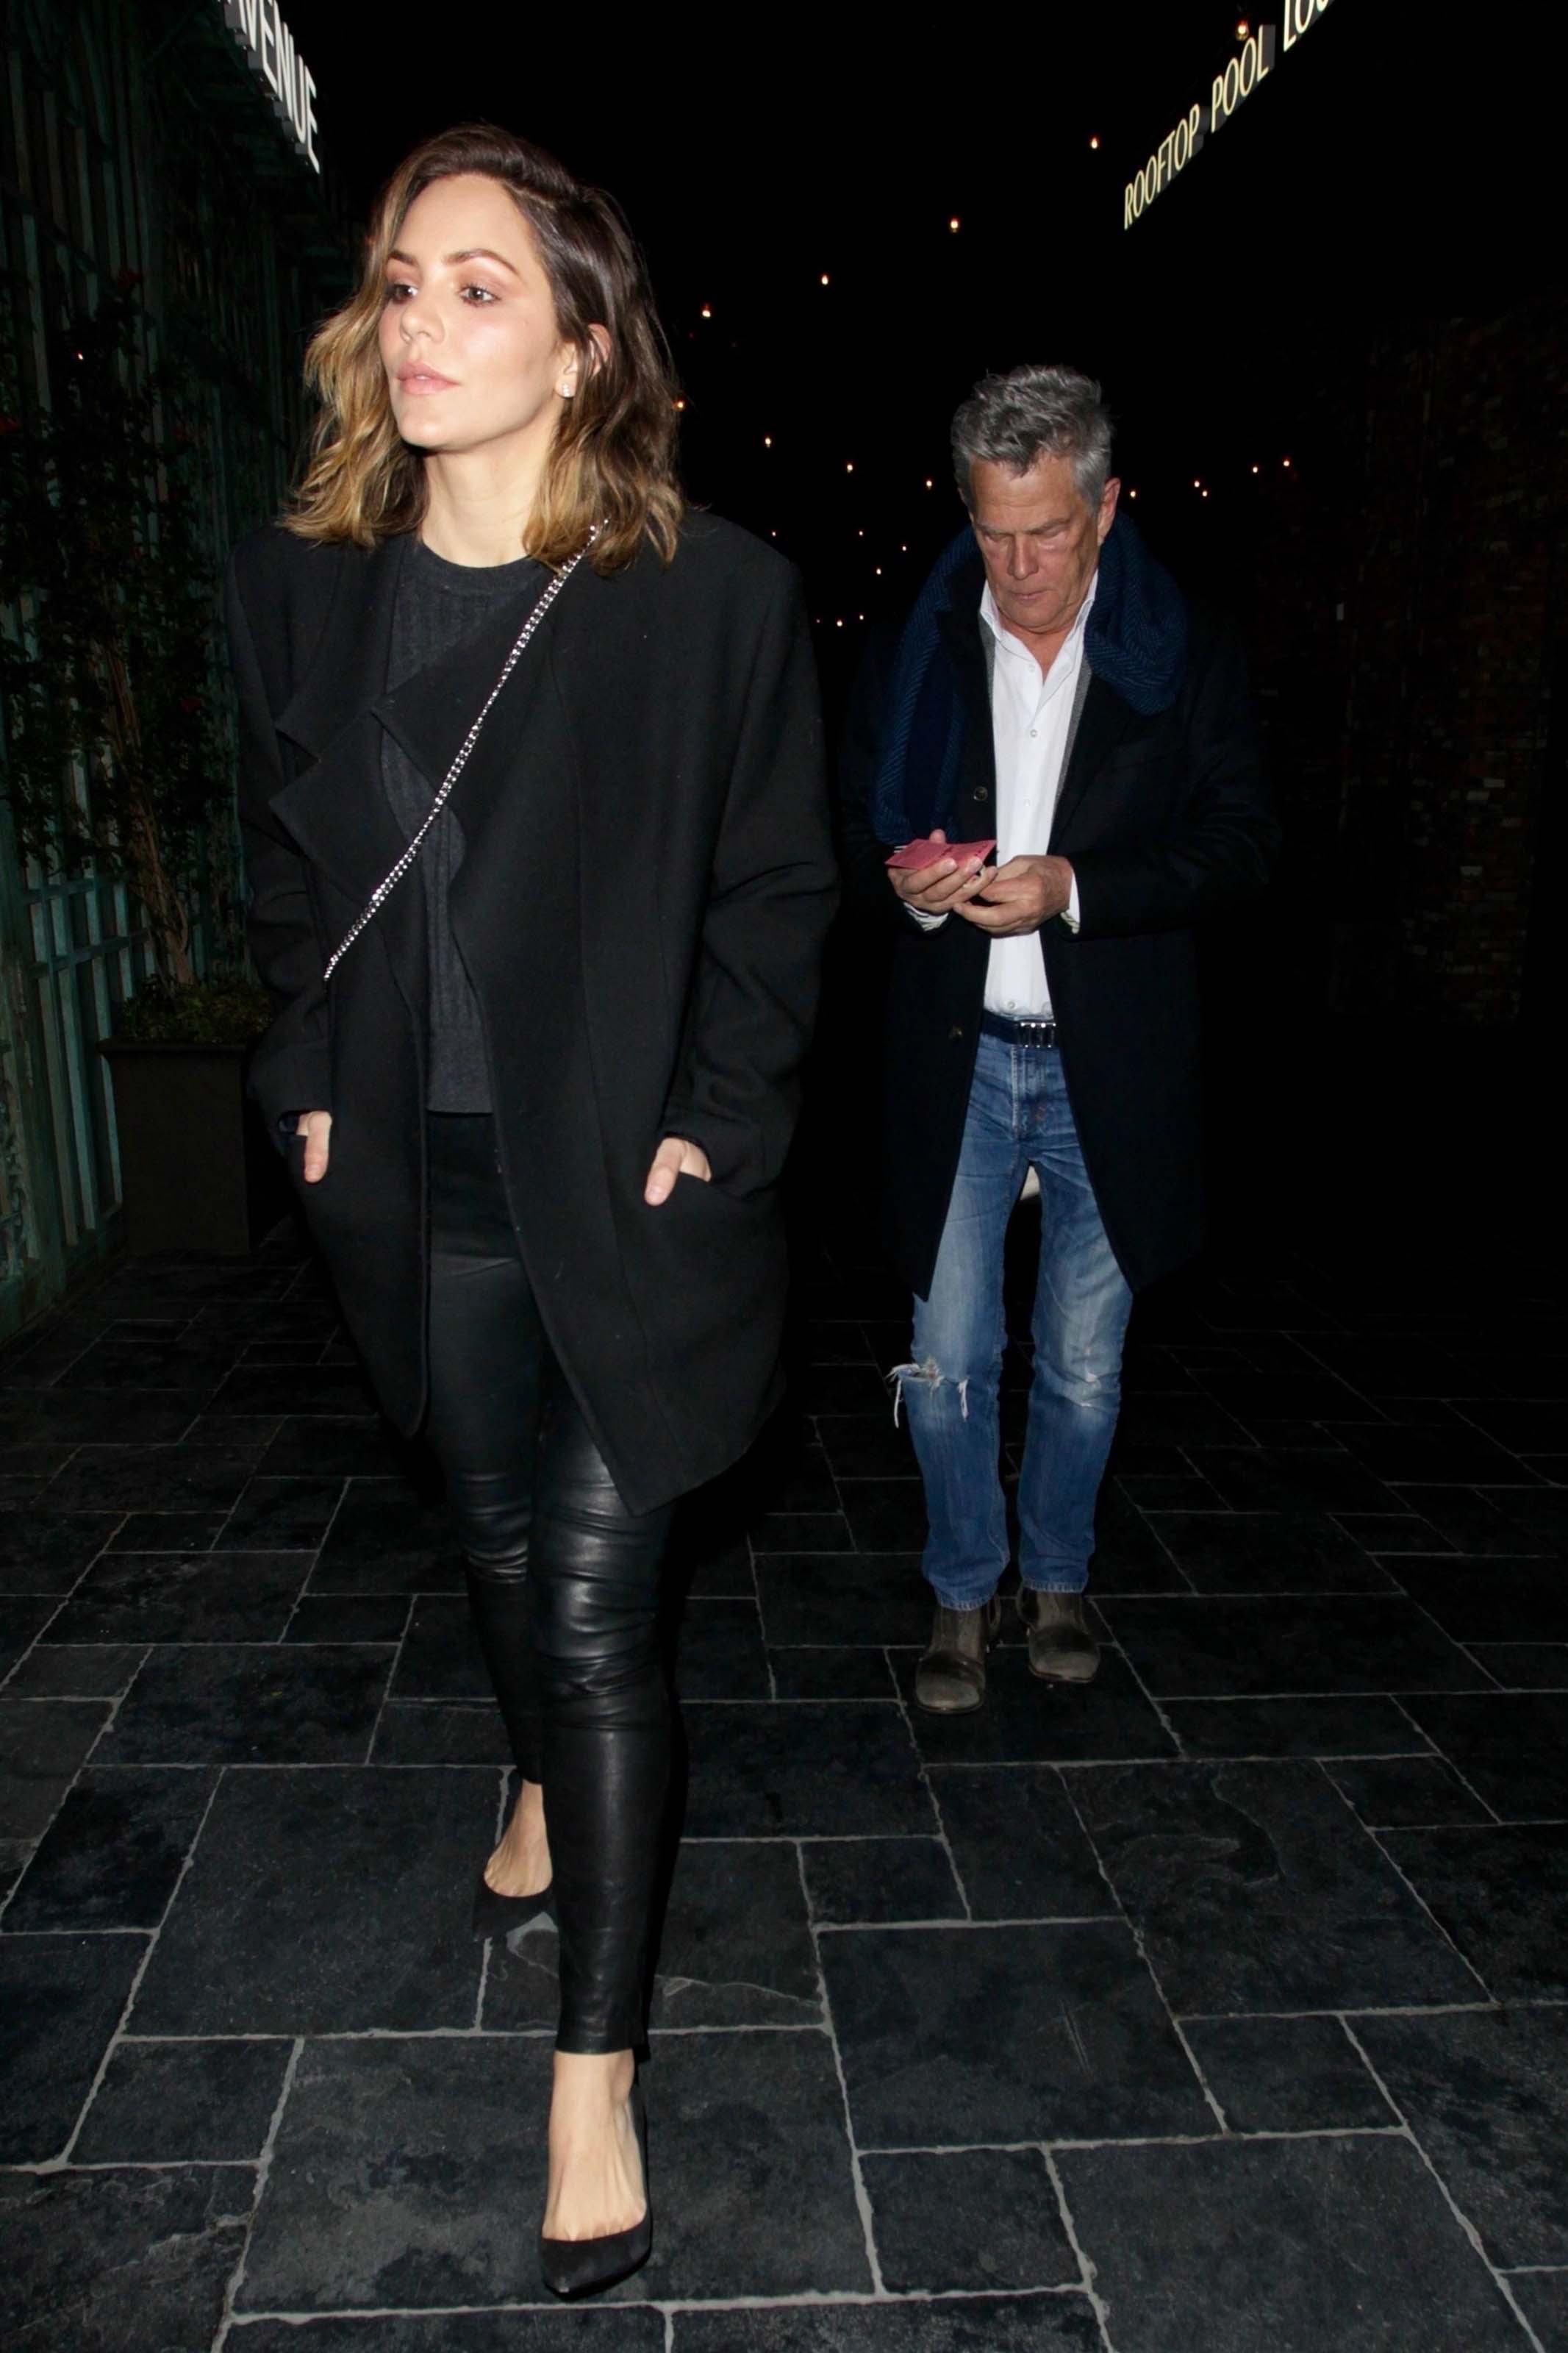 Katharine McPhee out to Dinner with David Foster